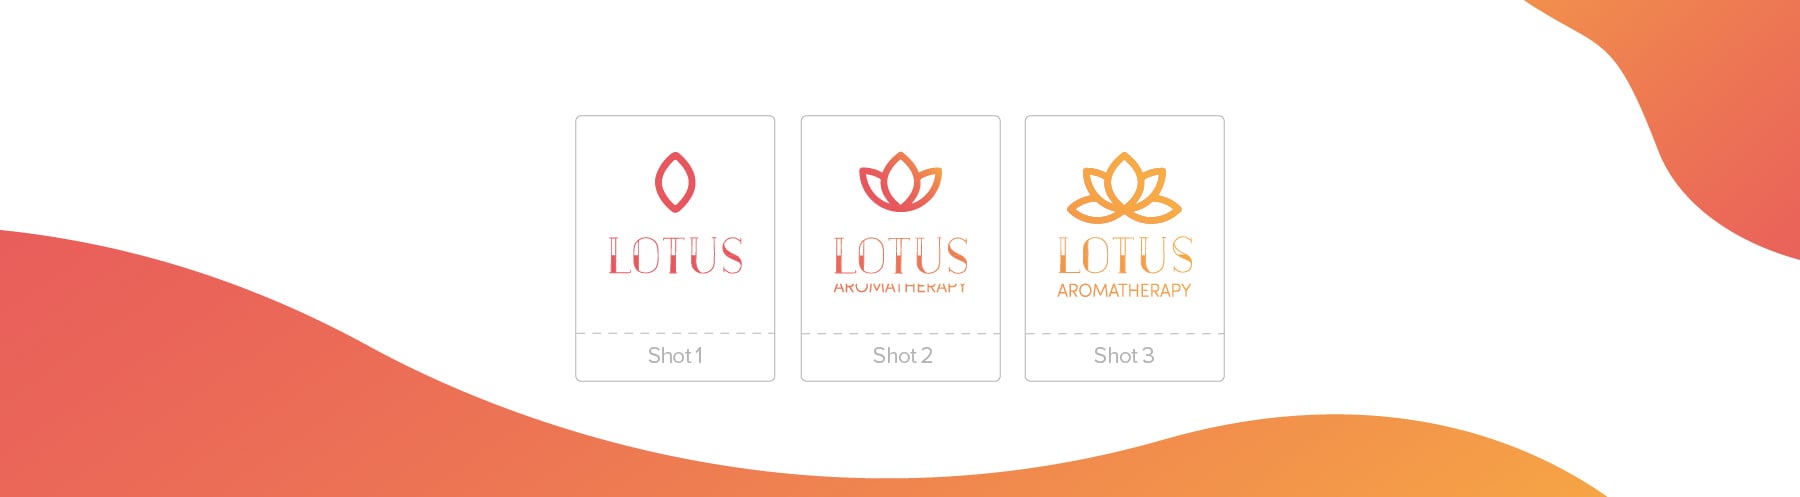 21 Animated Logos That will Move Your Business Ahead - Tailor Brands